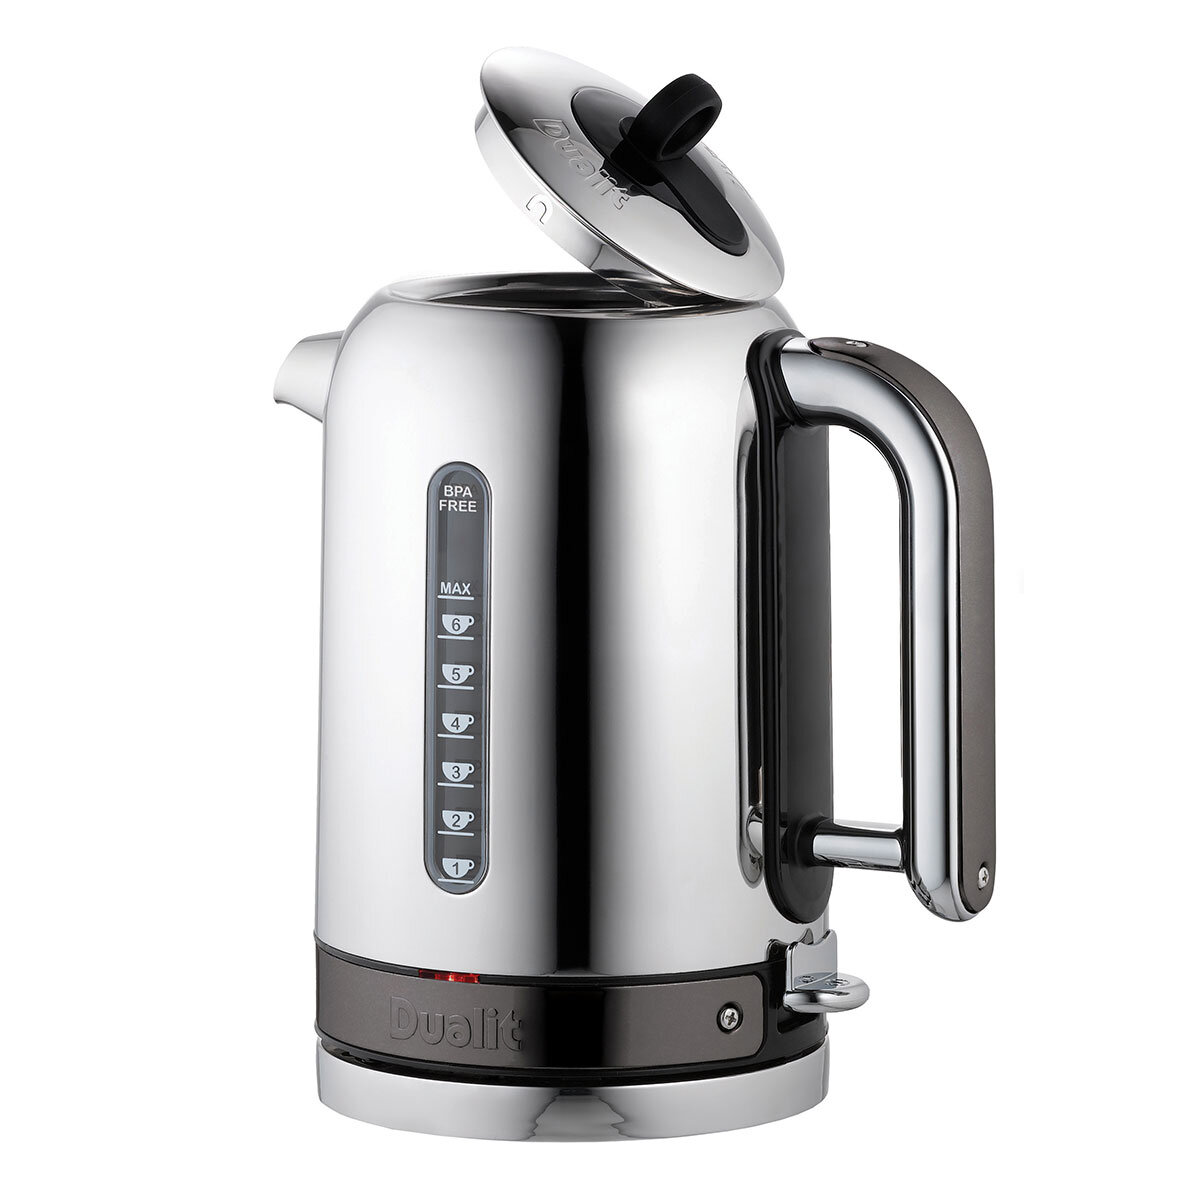 Side Profile Dualit kettle with lid up